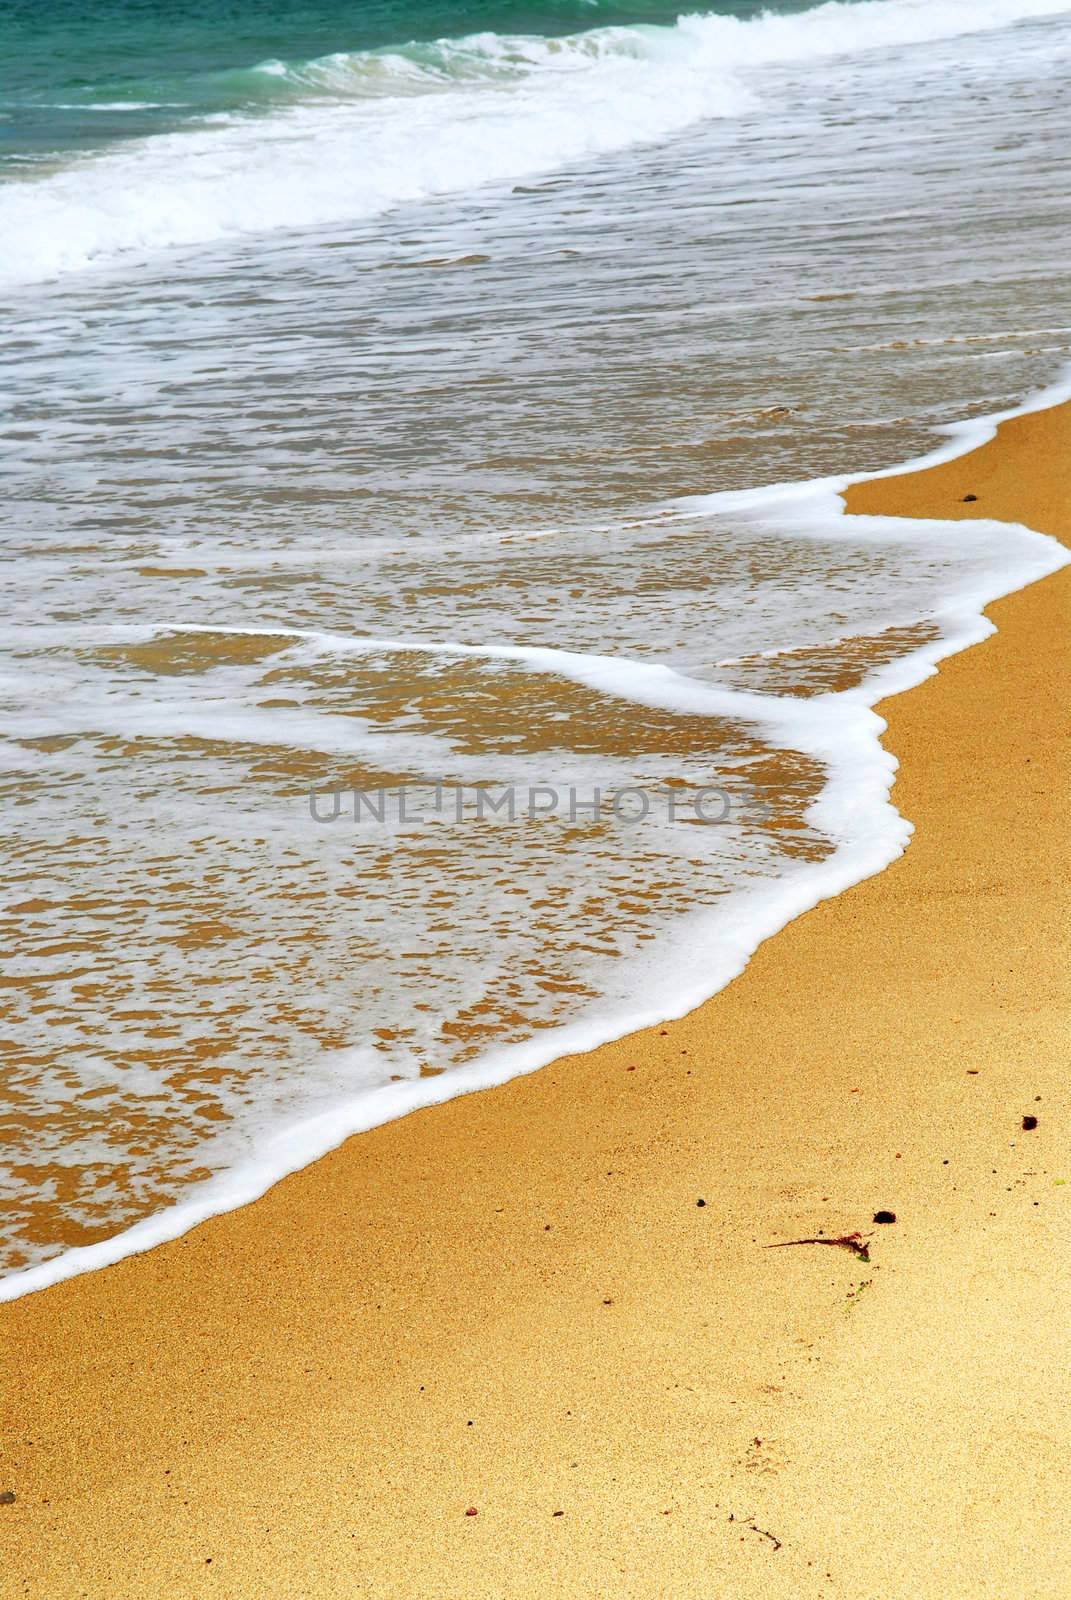 Ocean wave advancing on a sandy beach, natural background